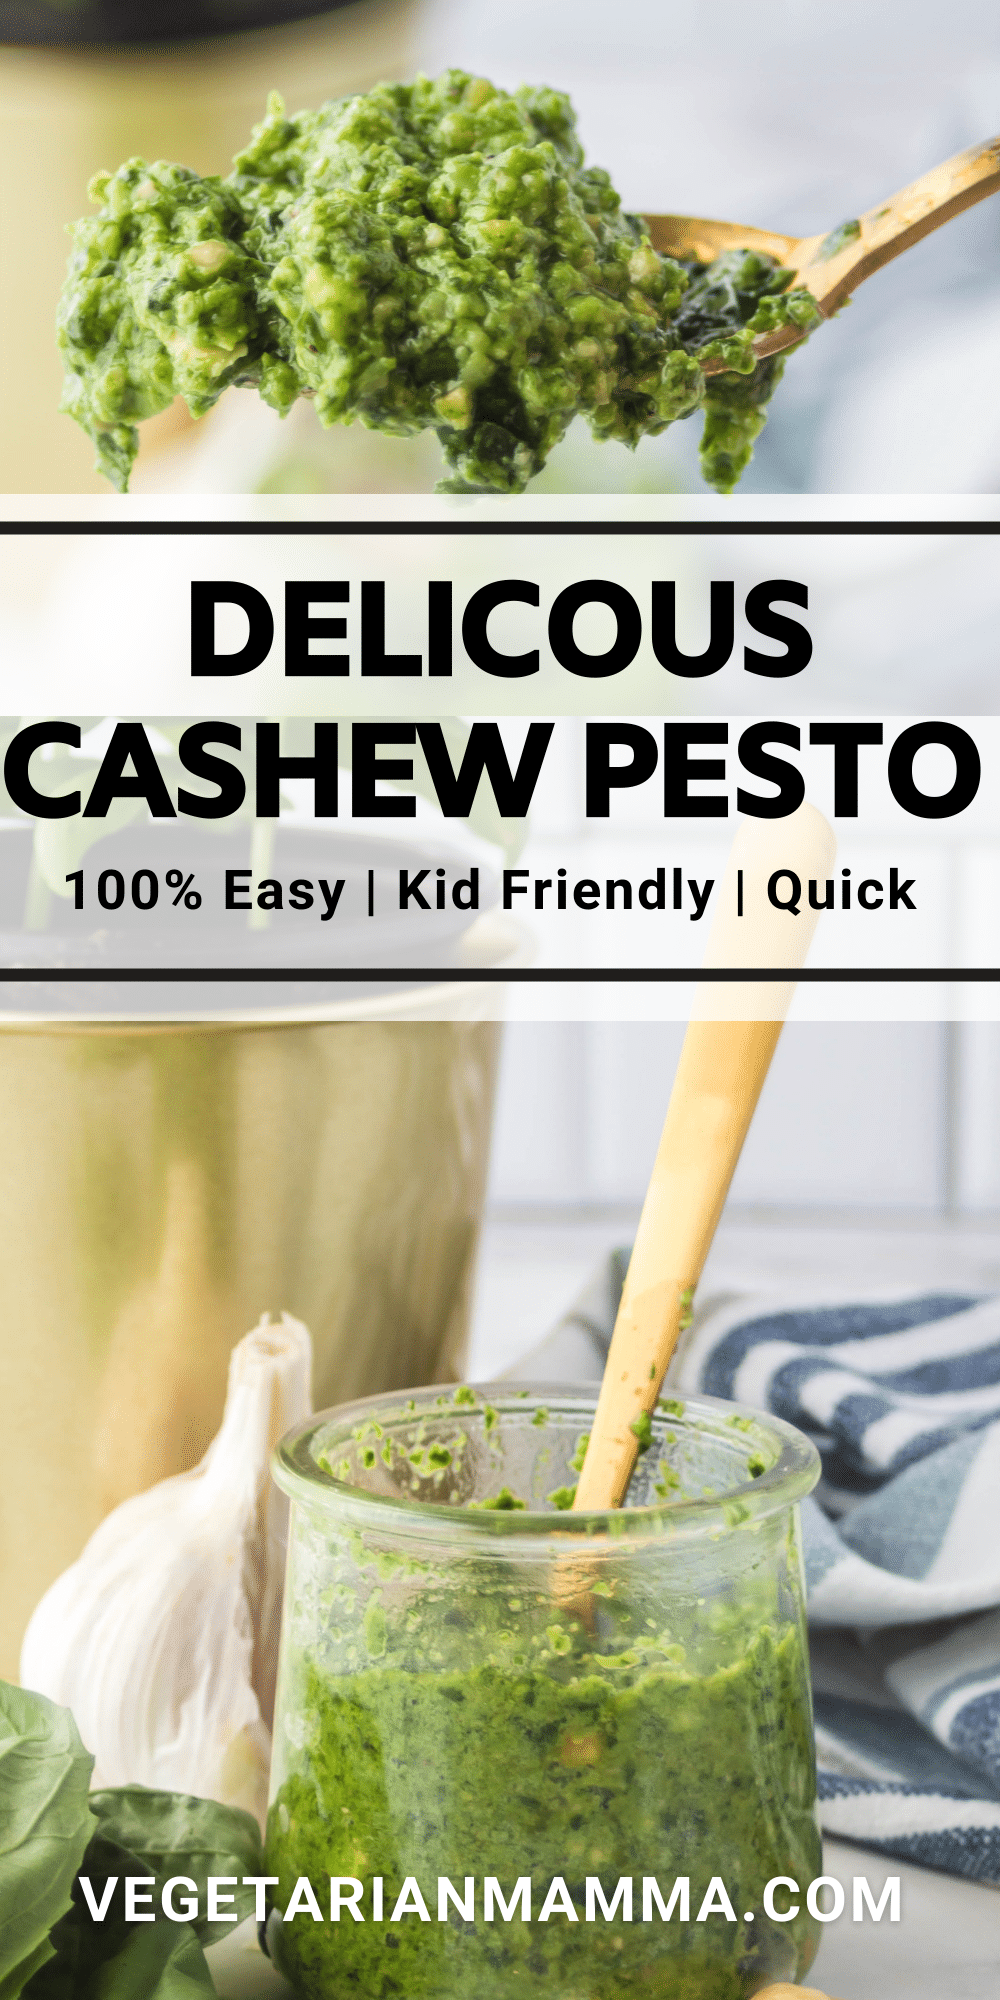 Homemade Cashew Pesto is so easy to make! Use cashews rather than pine nuts to make a nutty, herby spread that will add flavor and character to so many different meals. #pesto #cashewpesto